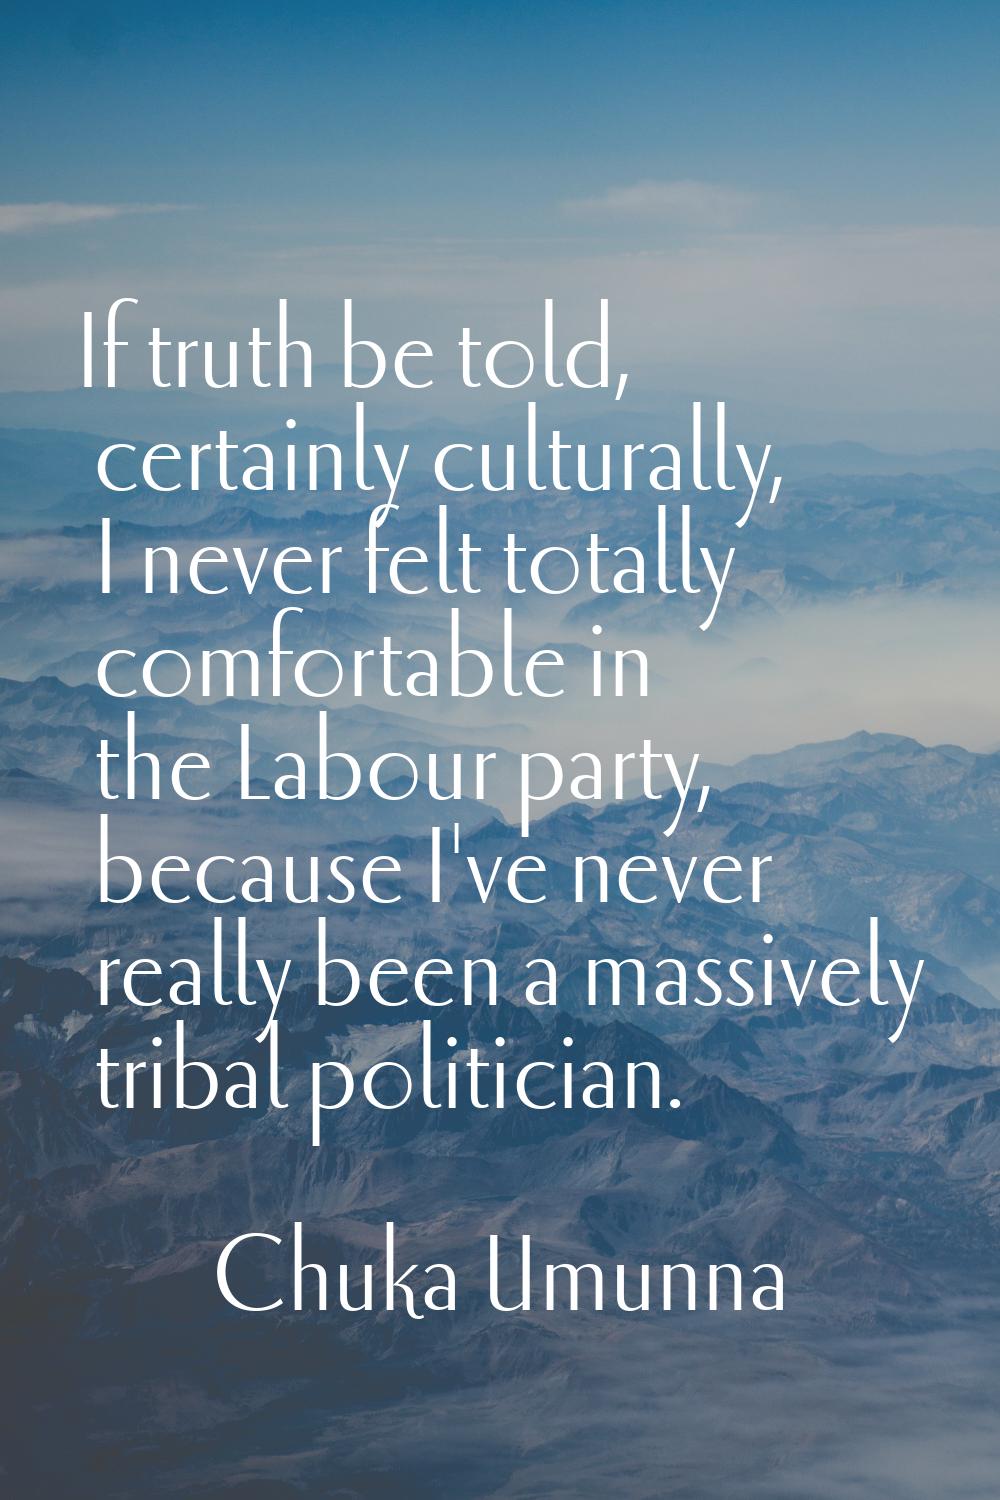 If truth be told, certainly culturally, I never felt totally comfortable in the Labour party, becau